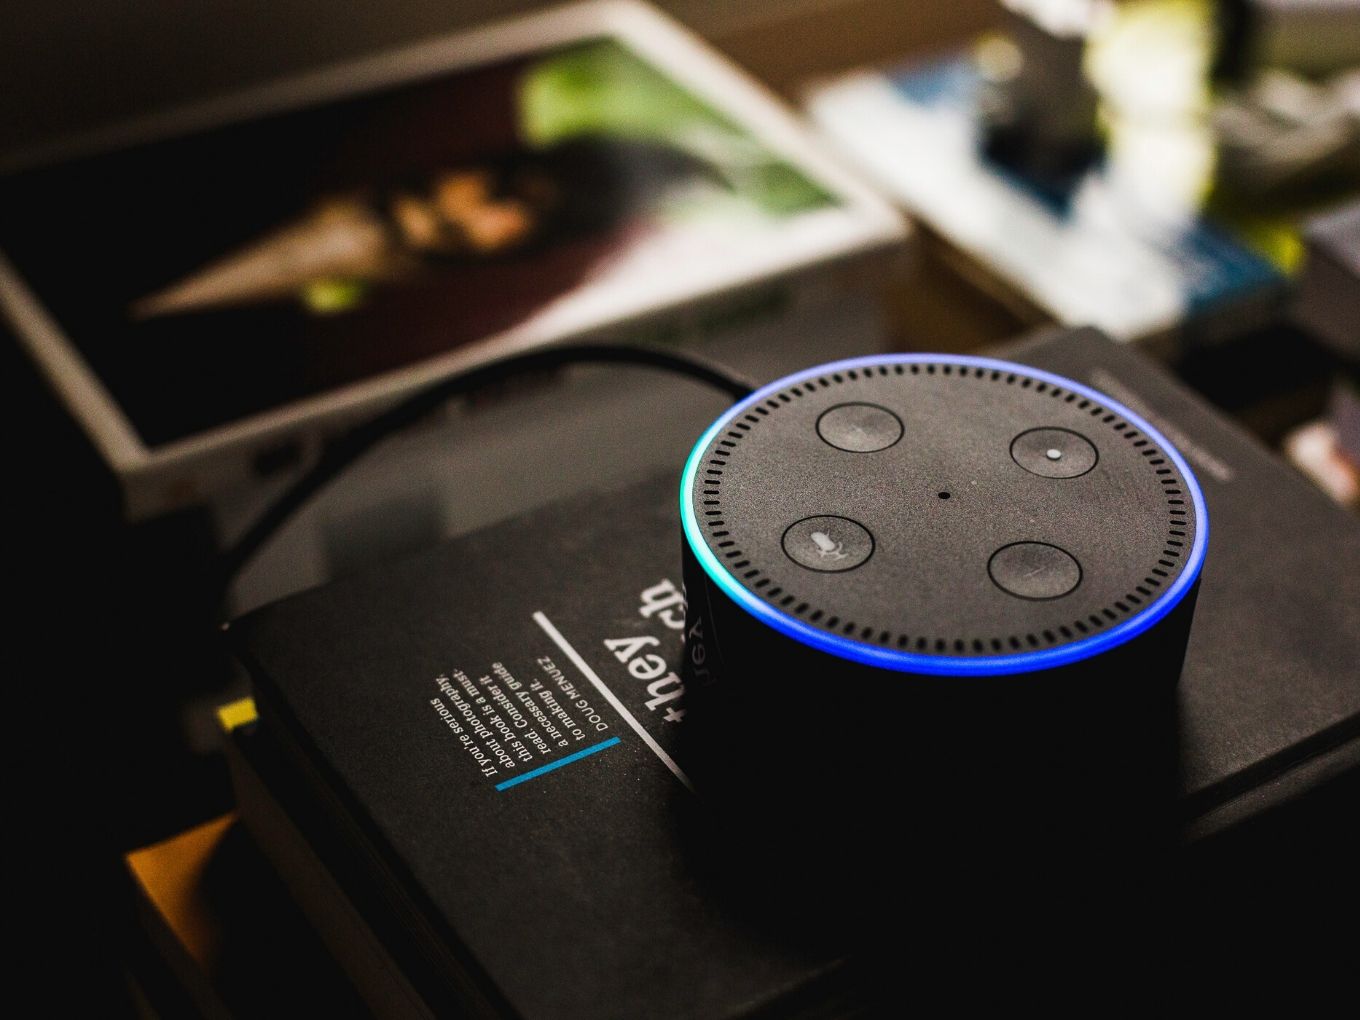 Amazon Plans To Boost Subscription Revenue From Alexa Skills In India